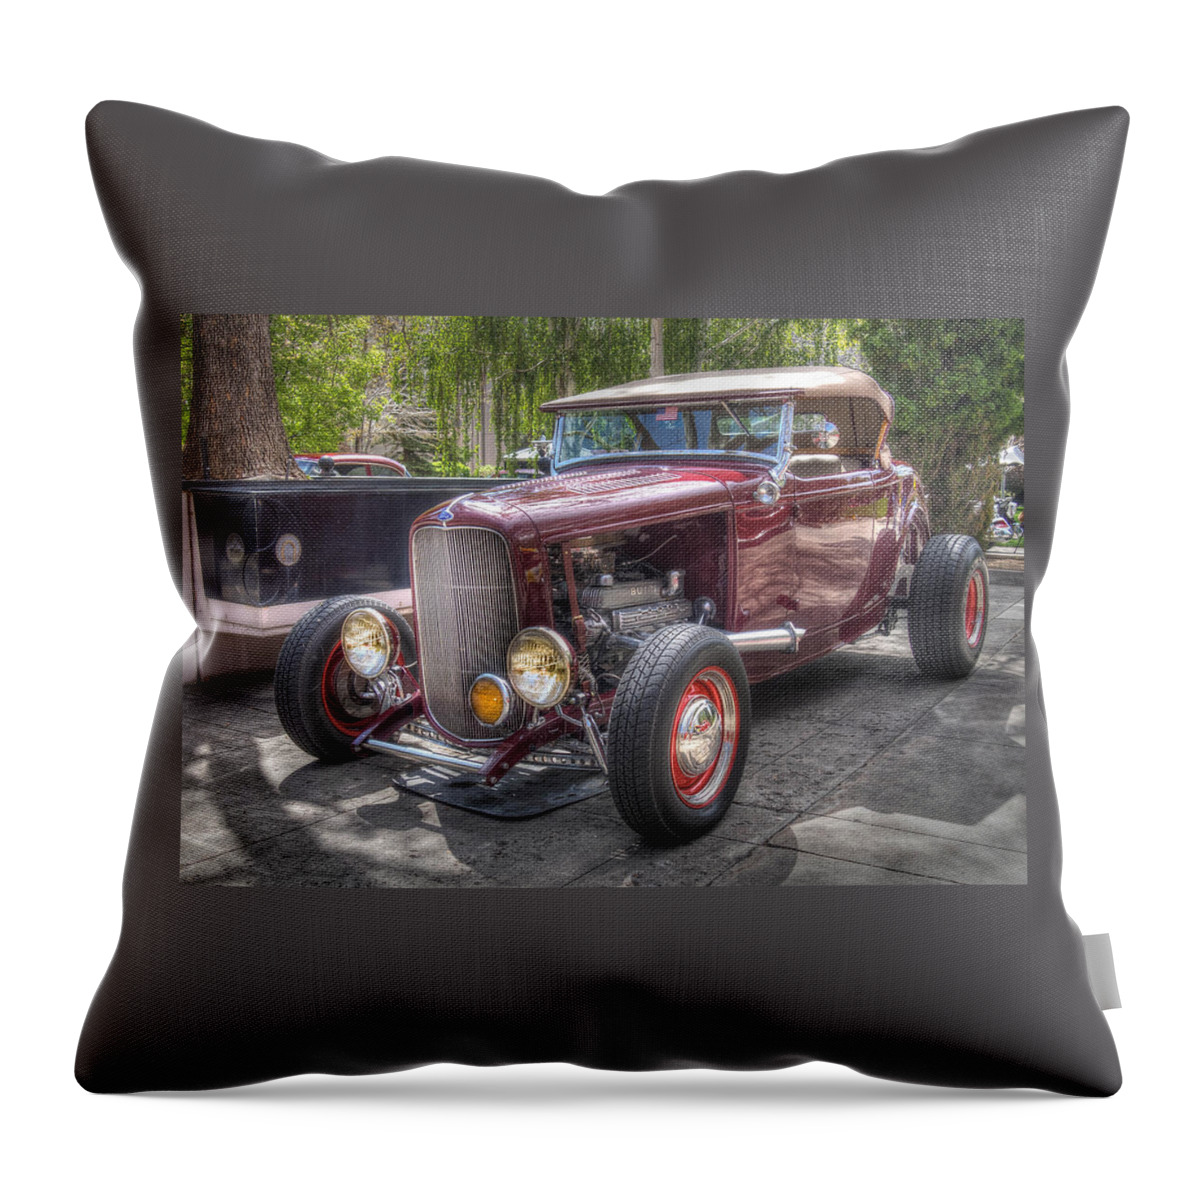 Carson City Nevada Throw Pillow featuring the photograph Maroon T Bucket by Thom Zehrfeld